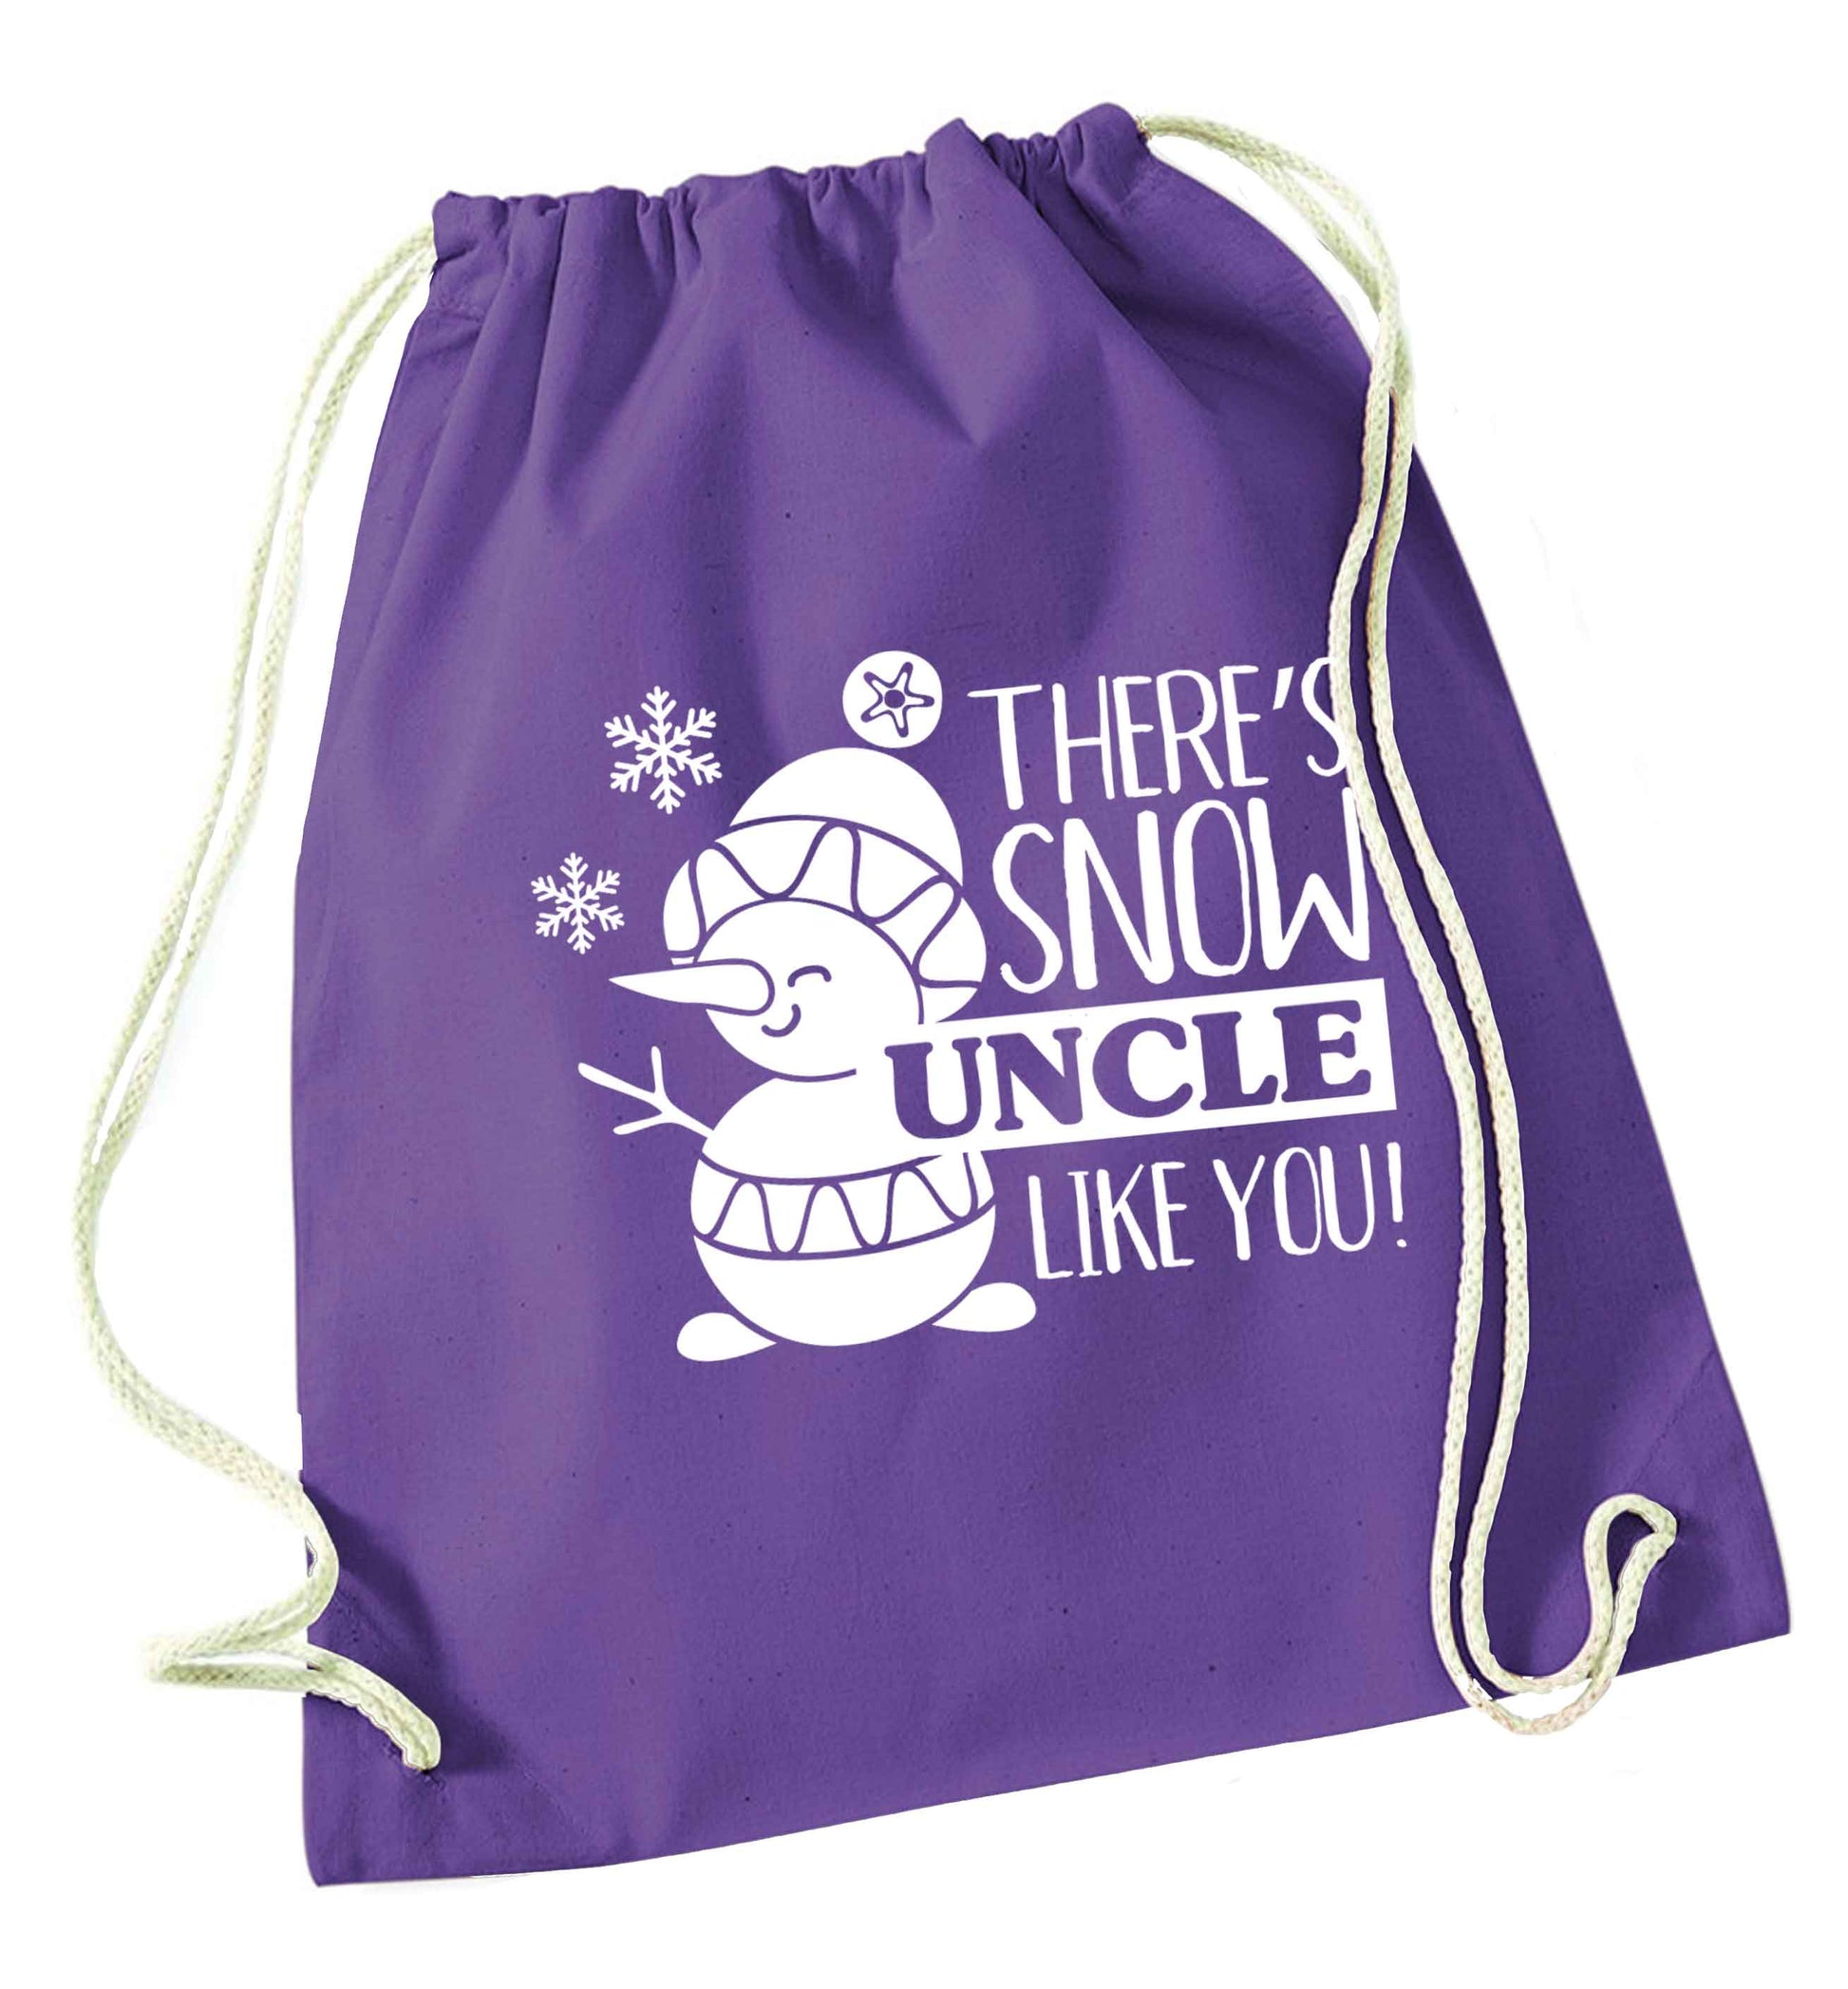 There's snow uncle like you purple drawstring bag